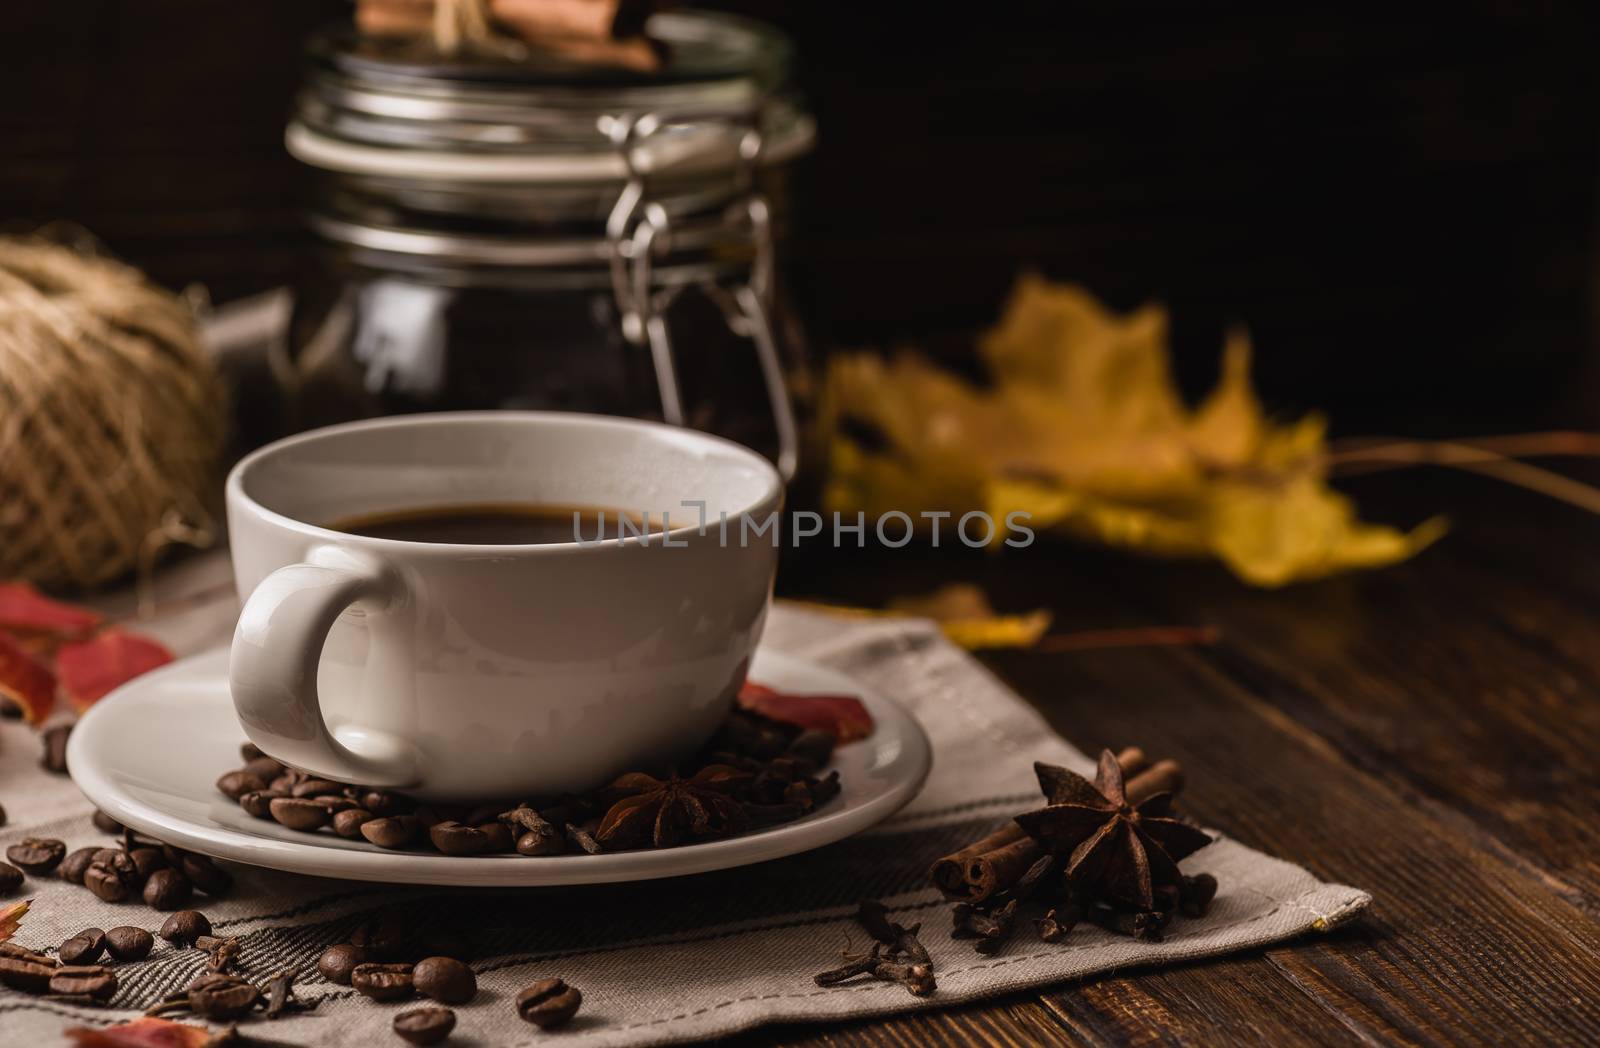 Cup of coffee with ingredients, spices and some kitchenware at autumn evening.